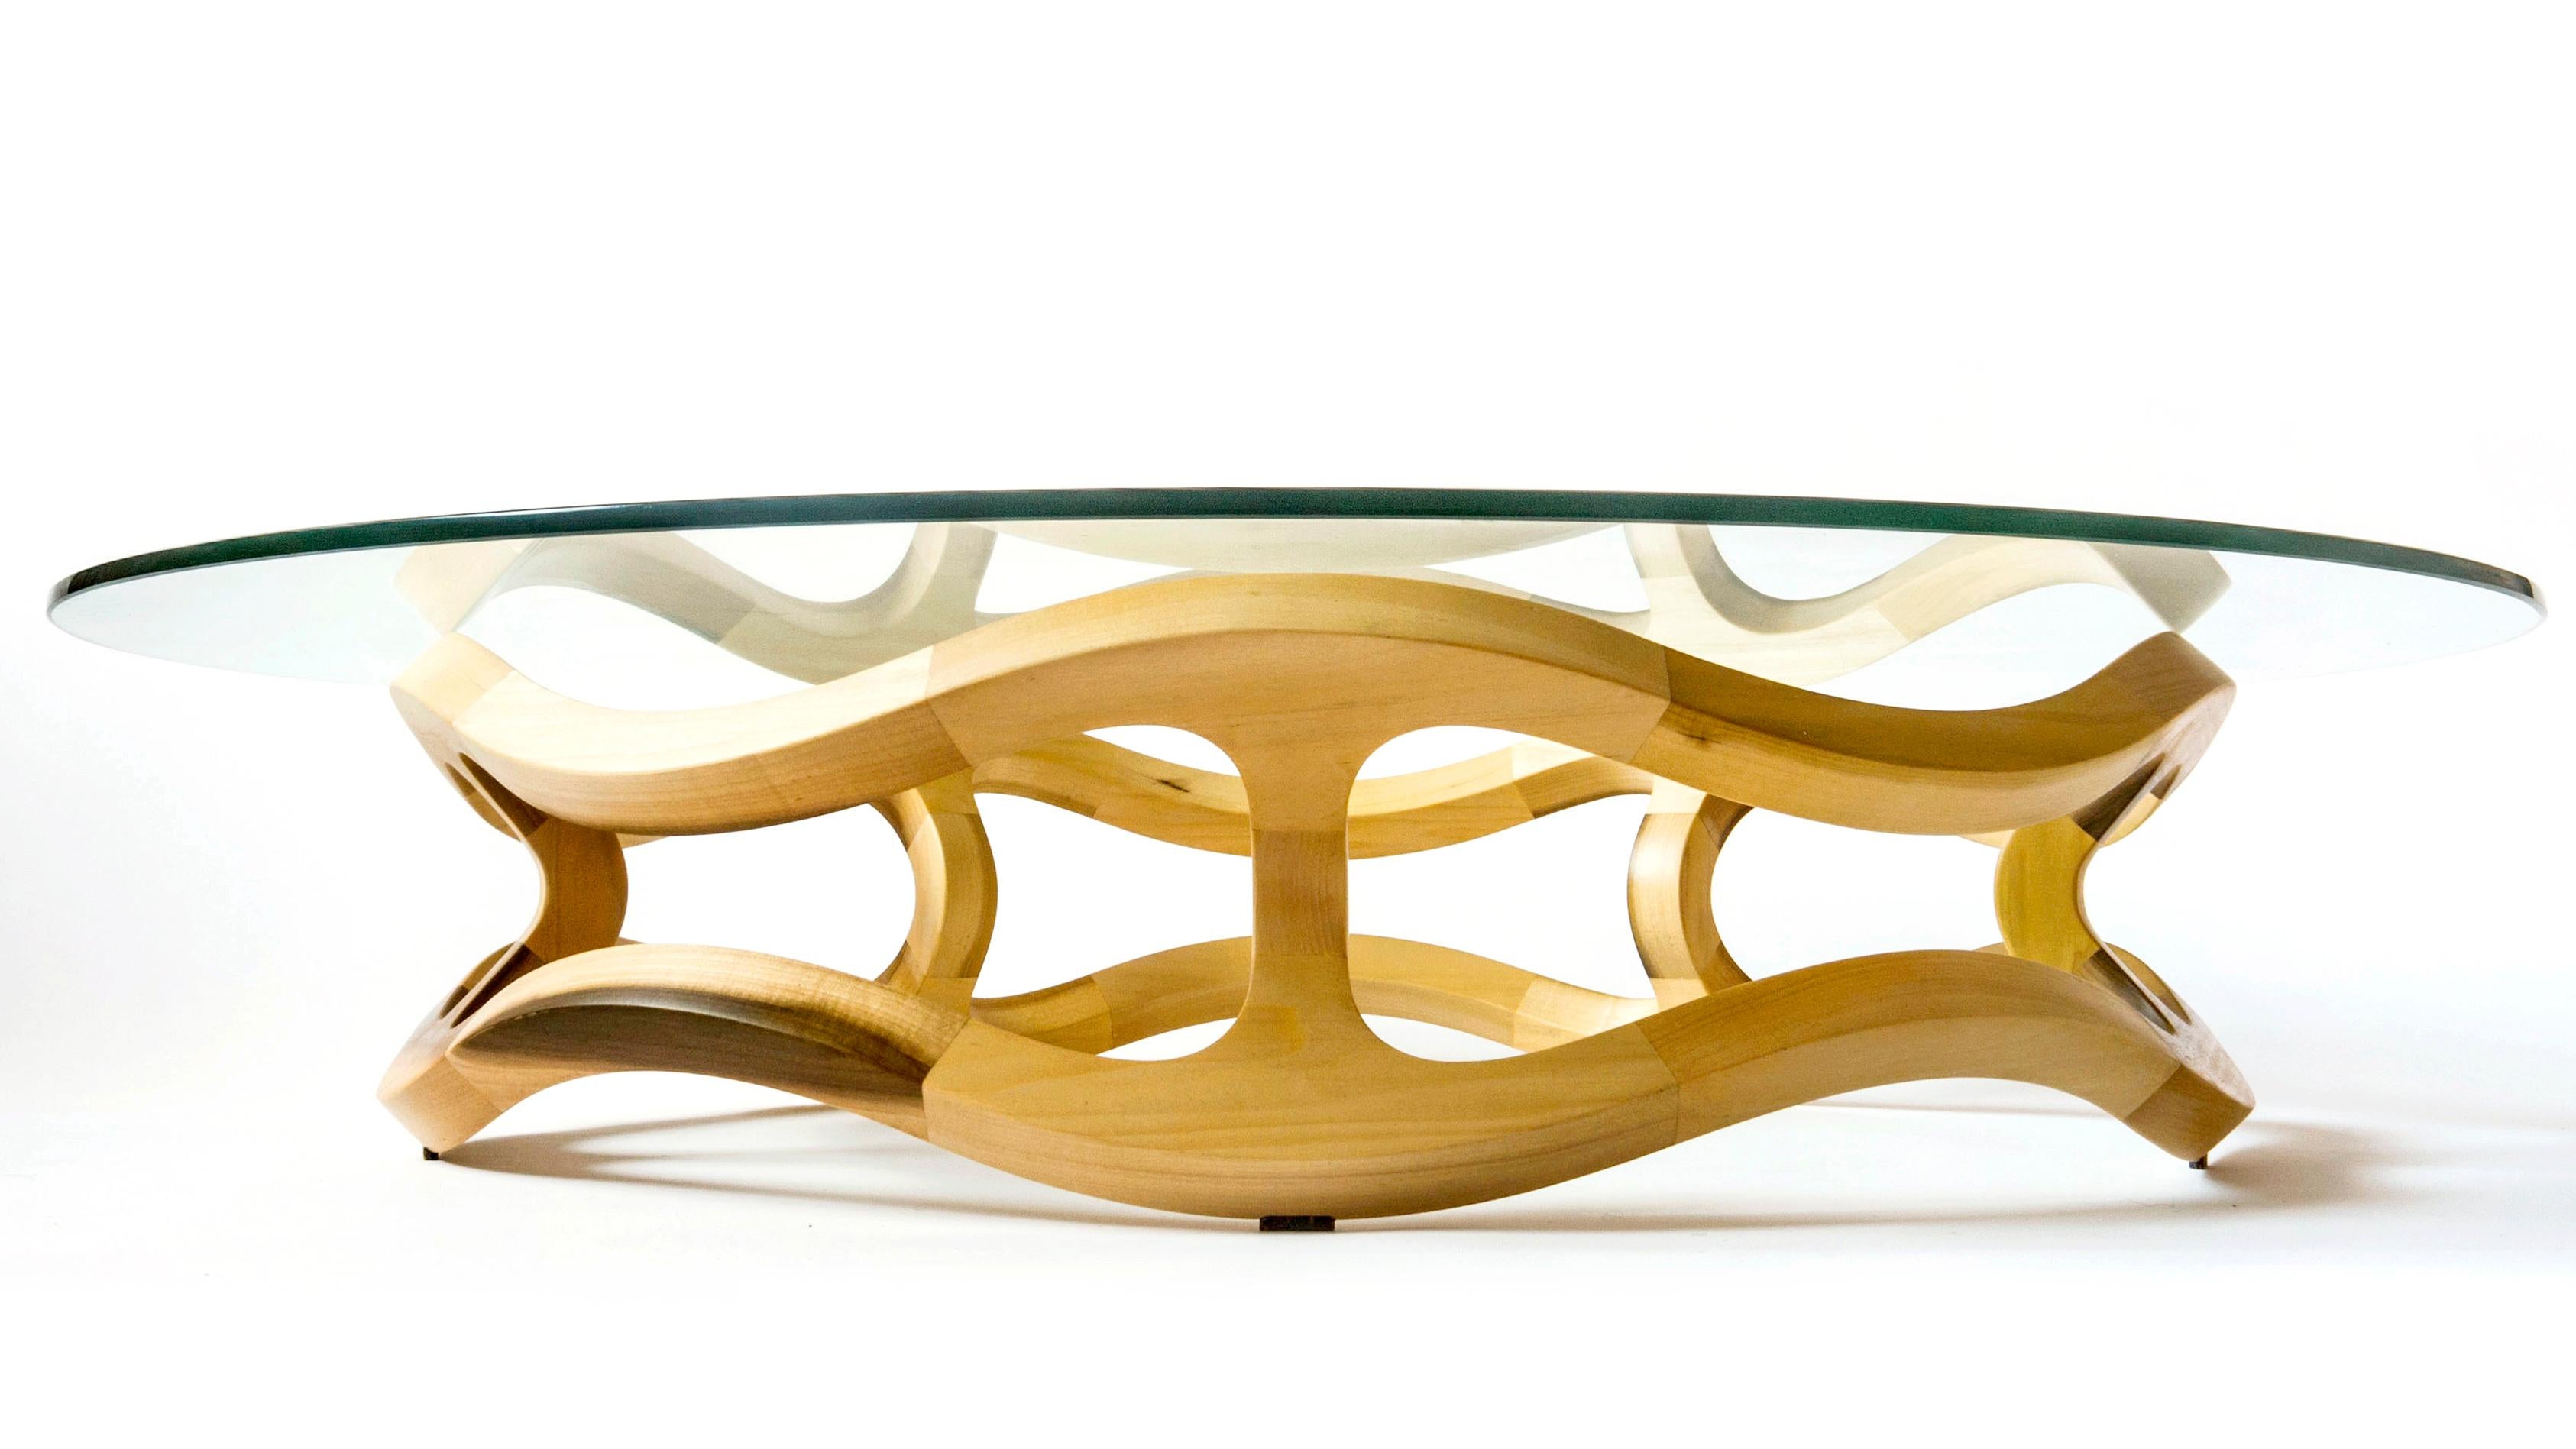 Poplar Flamenca, Geometric Sculptural Center Table Made of Solid Wood by Pedro Cerisola For Sale